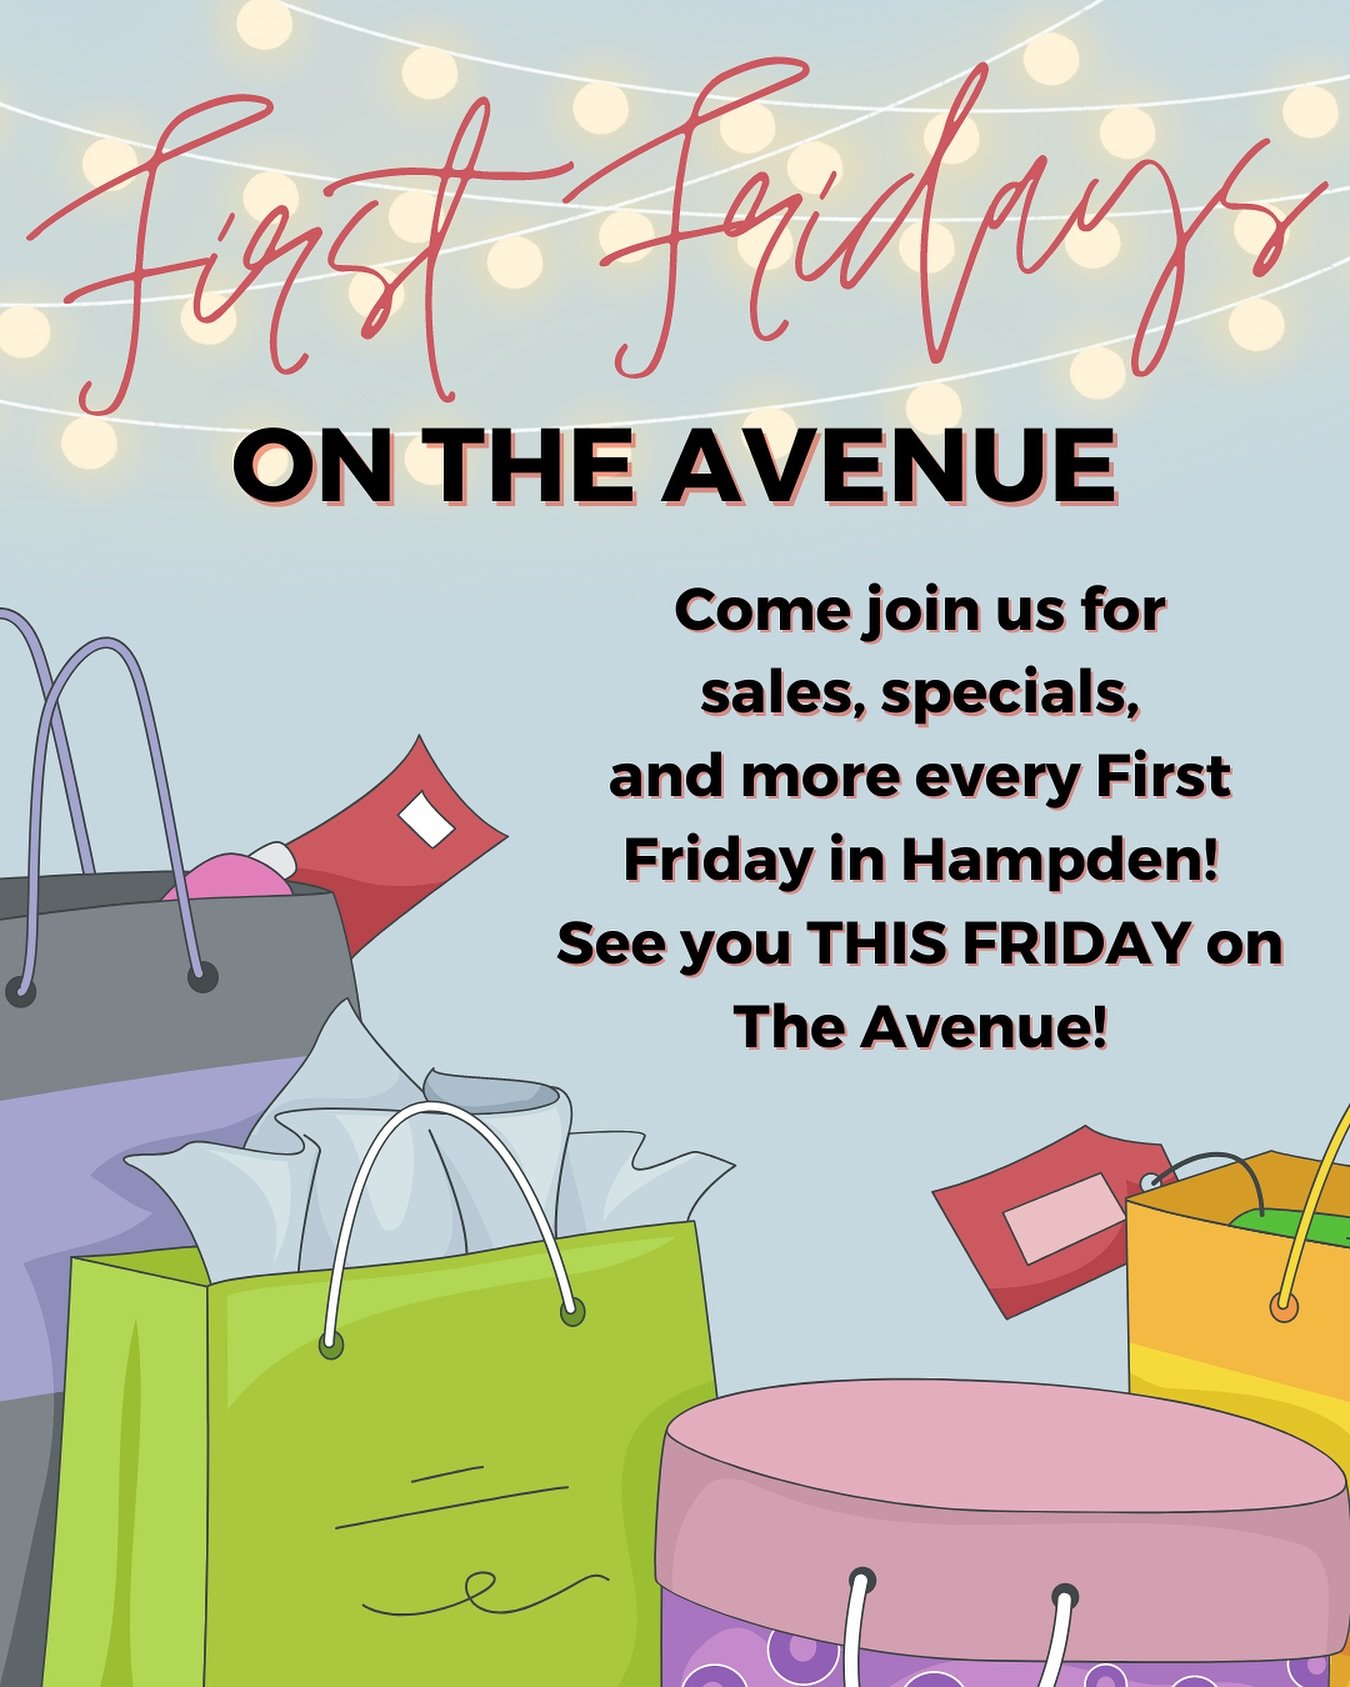 Every First Friday in Hampden, you can enjoy fabulous specials, treats, and good vibes throughout the neighborhood! Text your crew and plan to join us this Friday for First Fridays in Hampden&hellip;See you soon on The Avenue! 😍✨